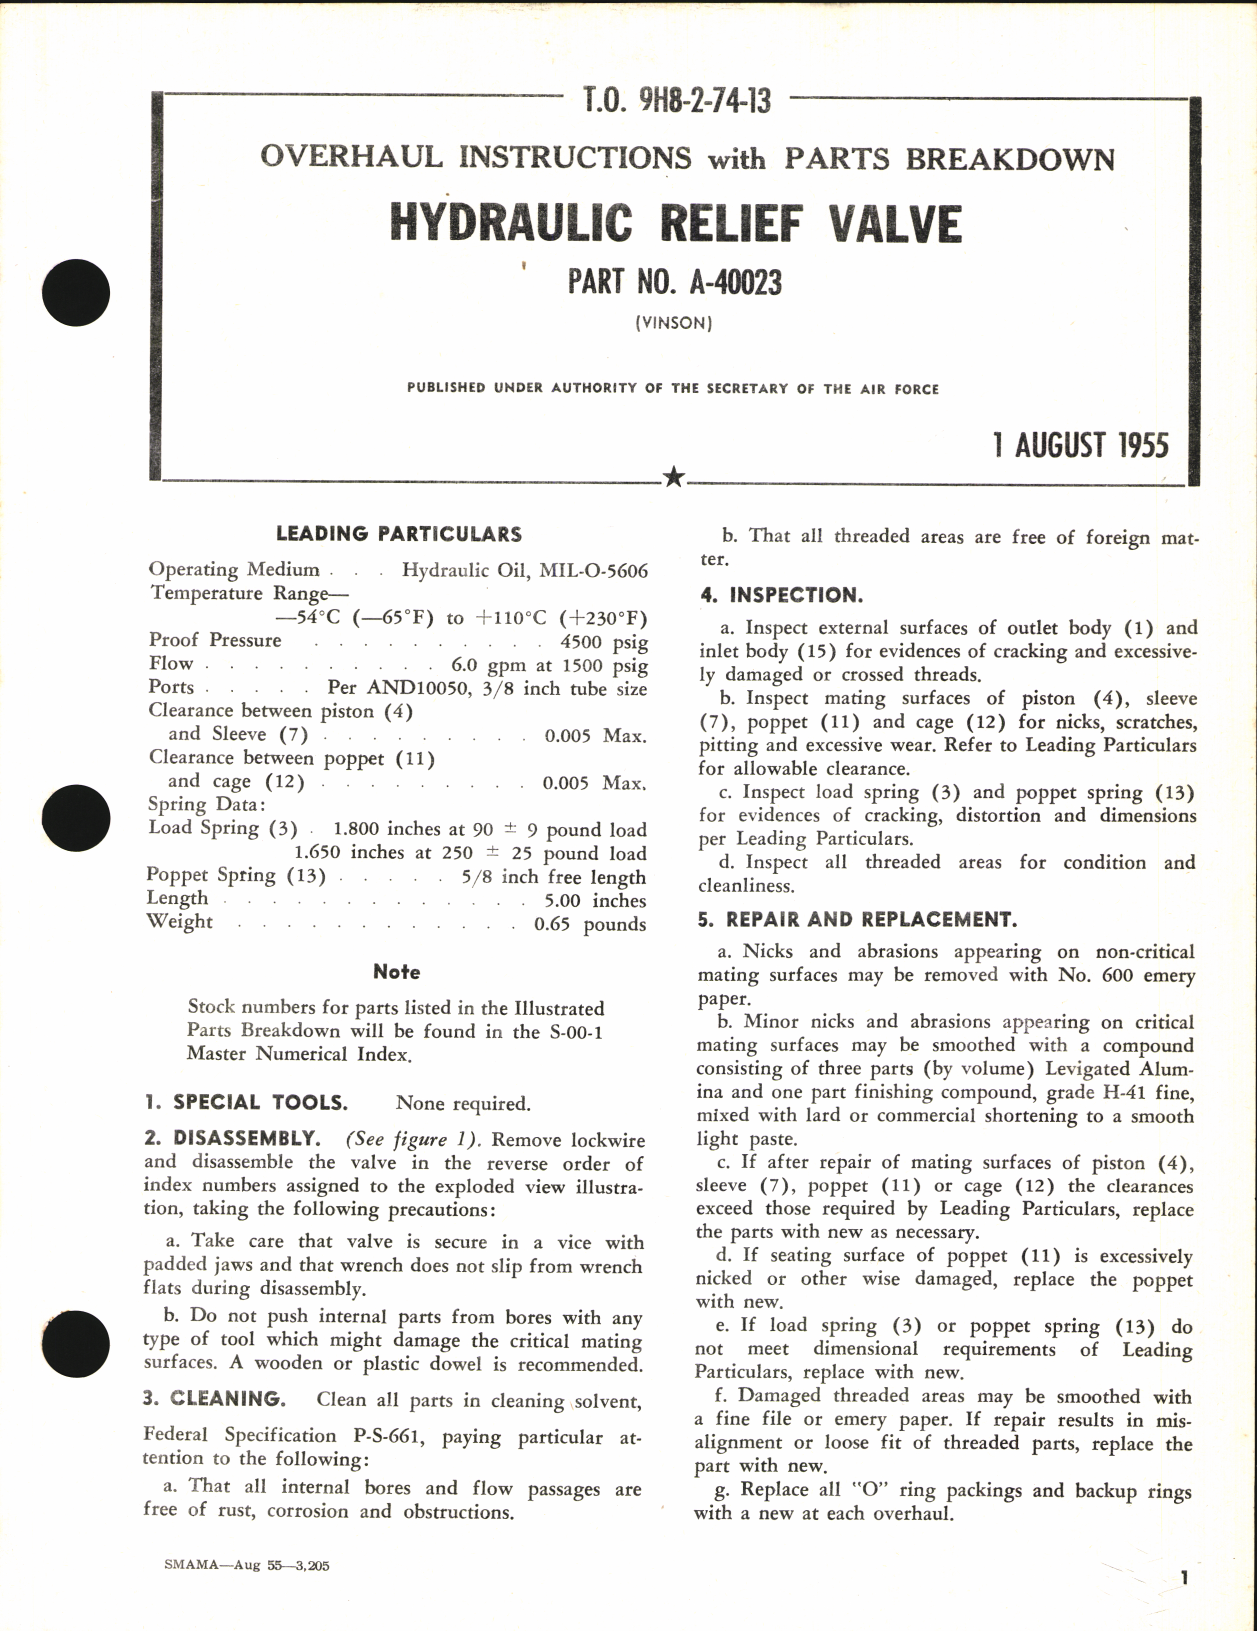 Sample page 1 from AirCorps Library document: Overhaul Instructions with Parts Breakdown for Hydraulic Relief Valve Part No. A-40023